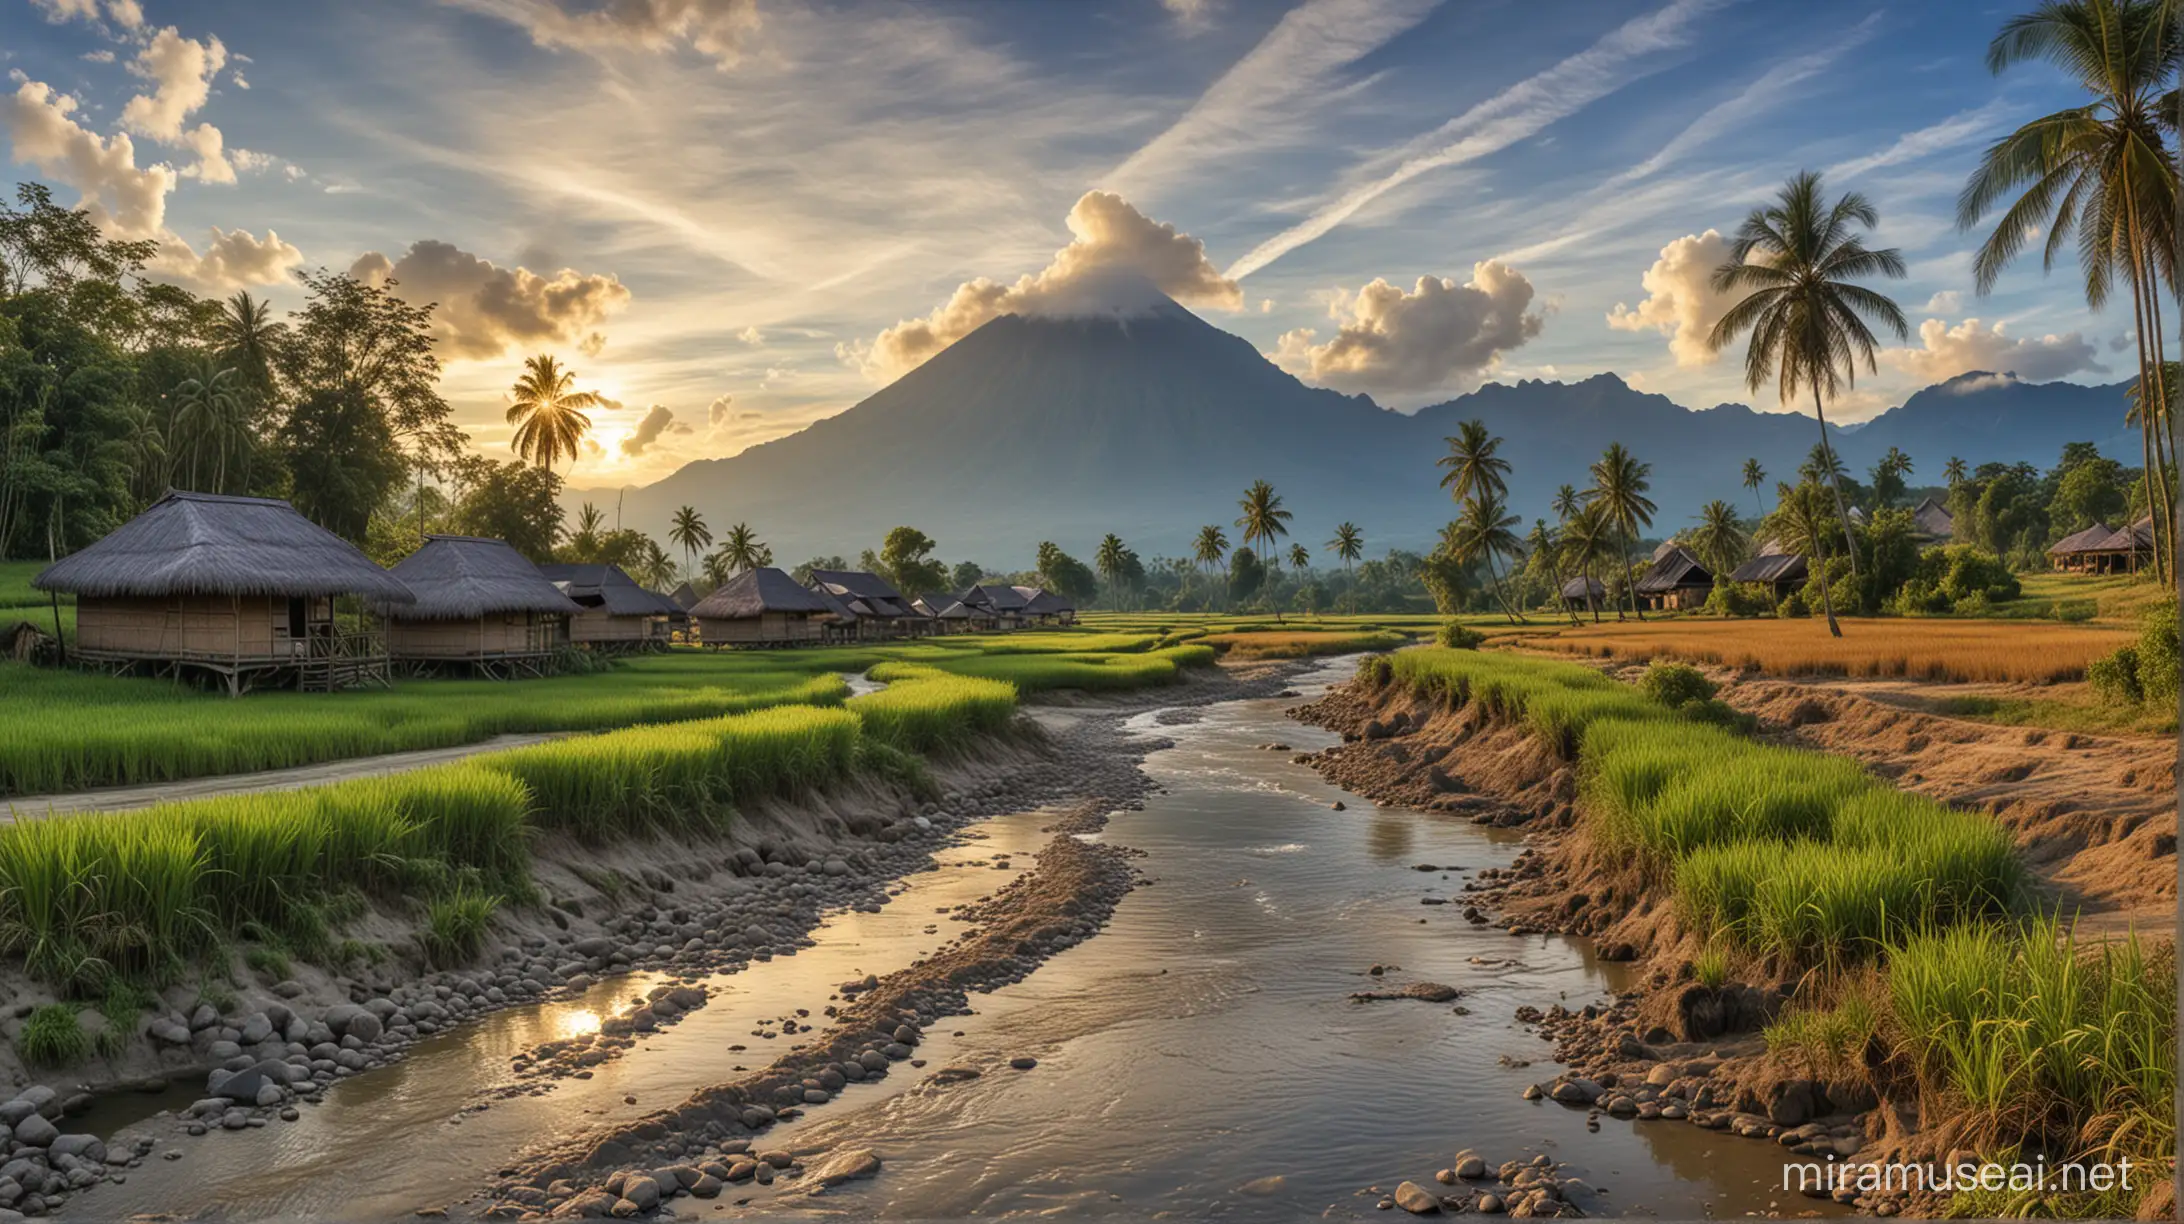 Scenic Landscape Painting of Mount Merapi with Vibrant Rice Fields and Bamboo Huts